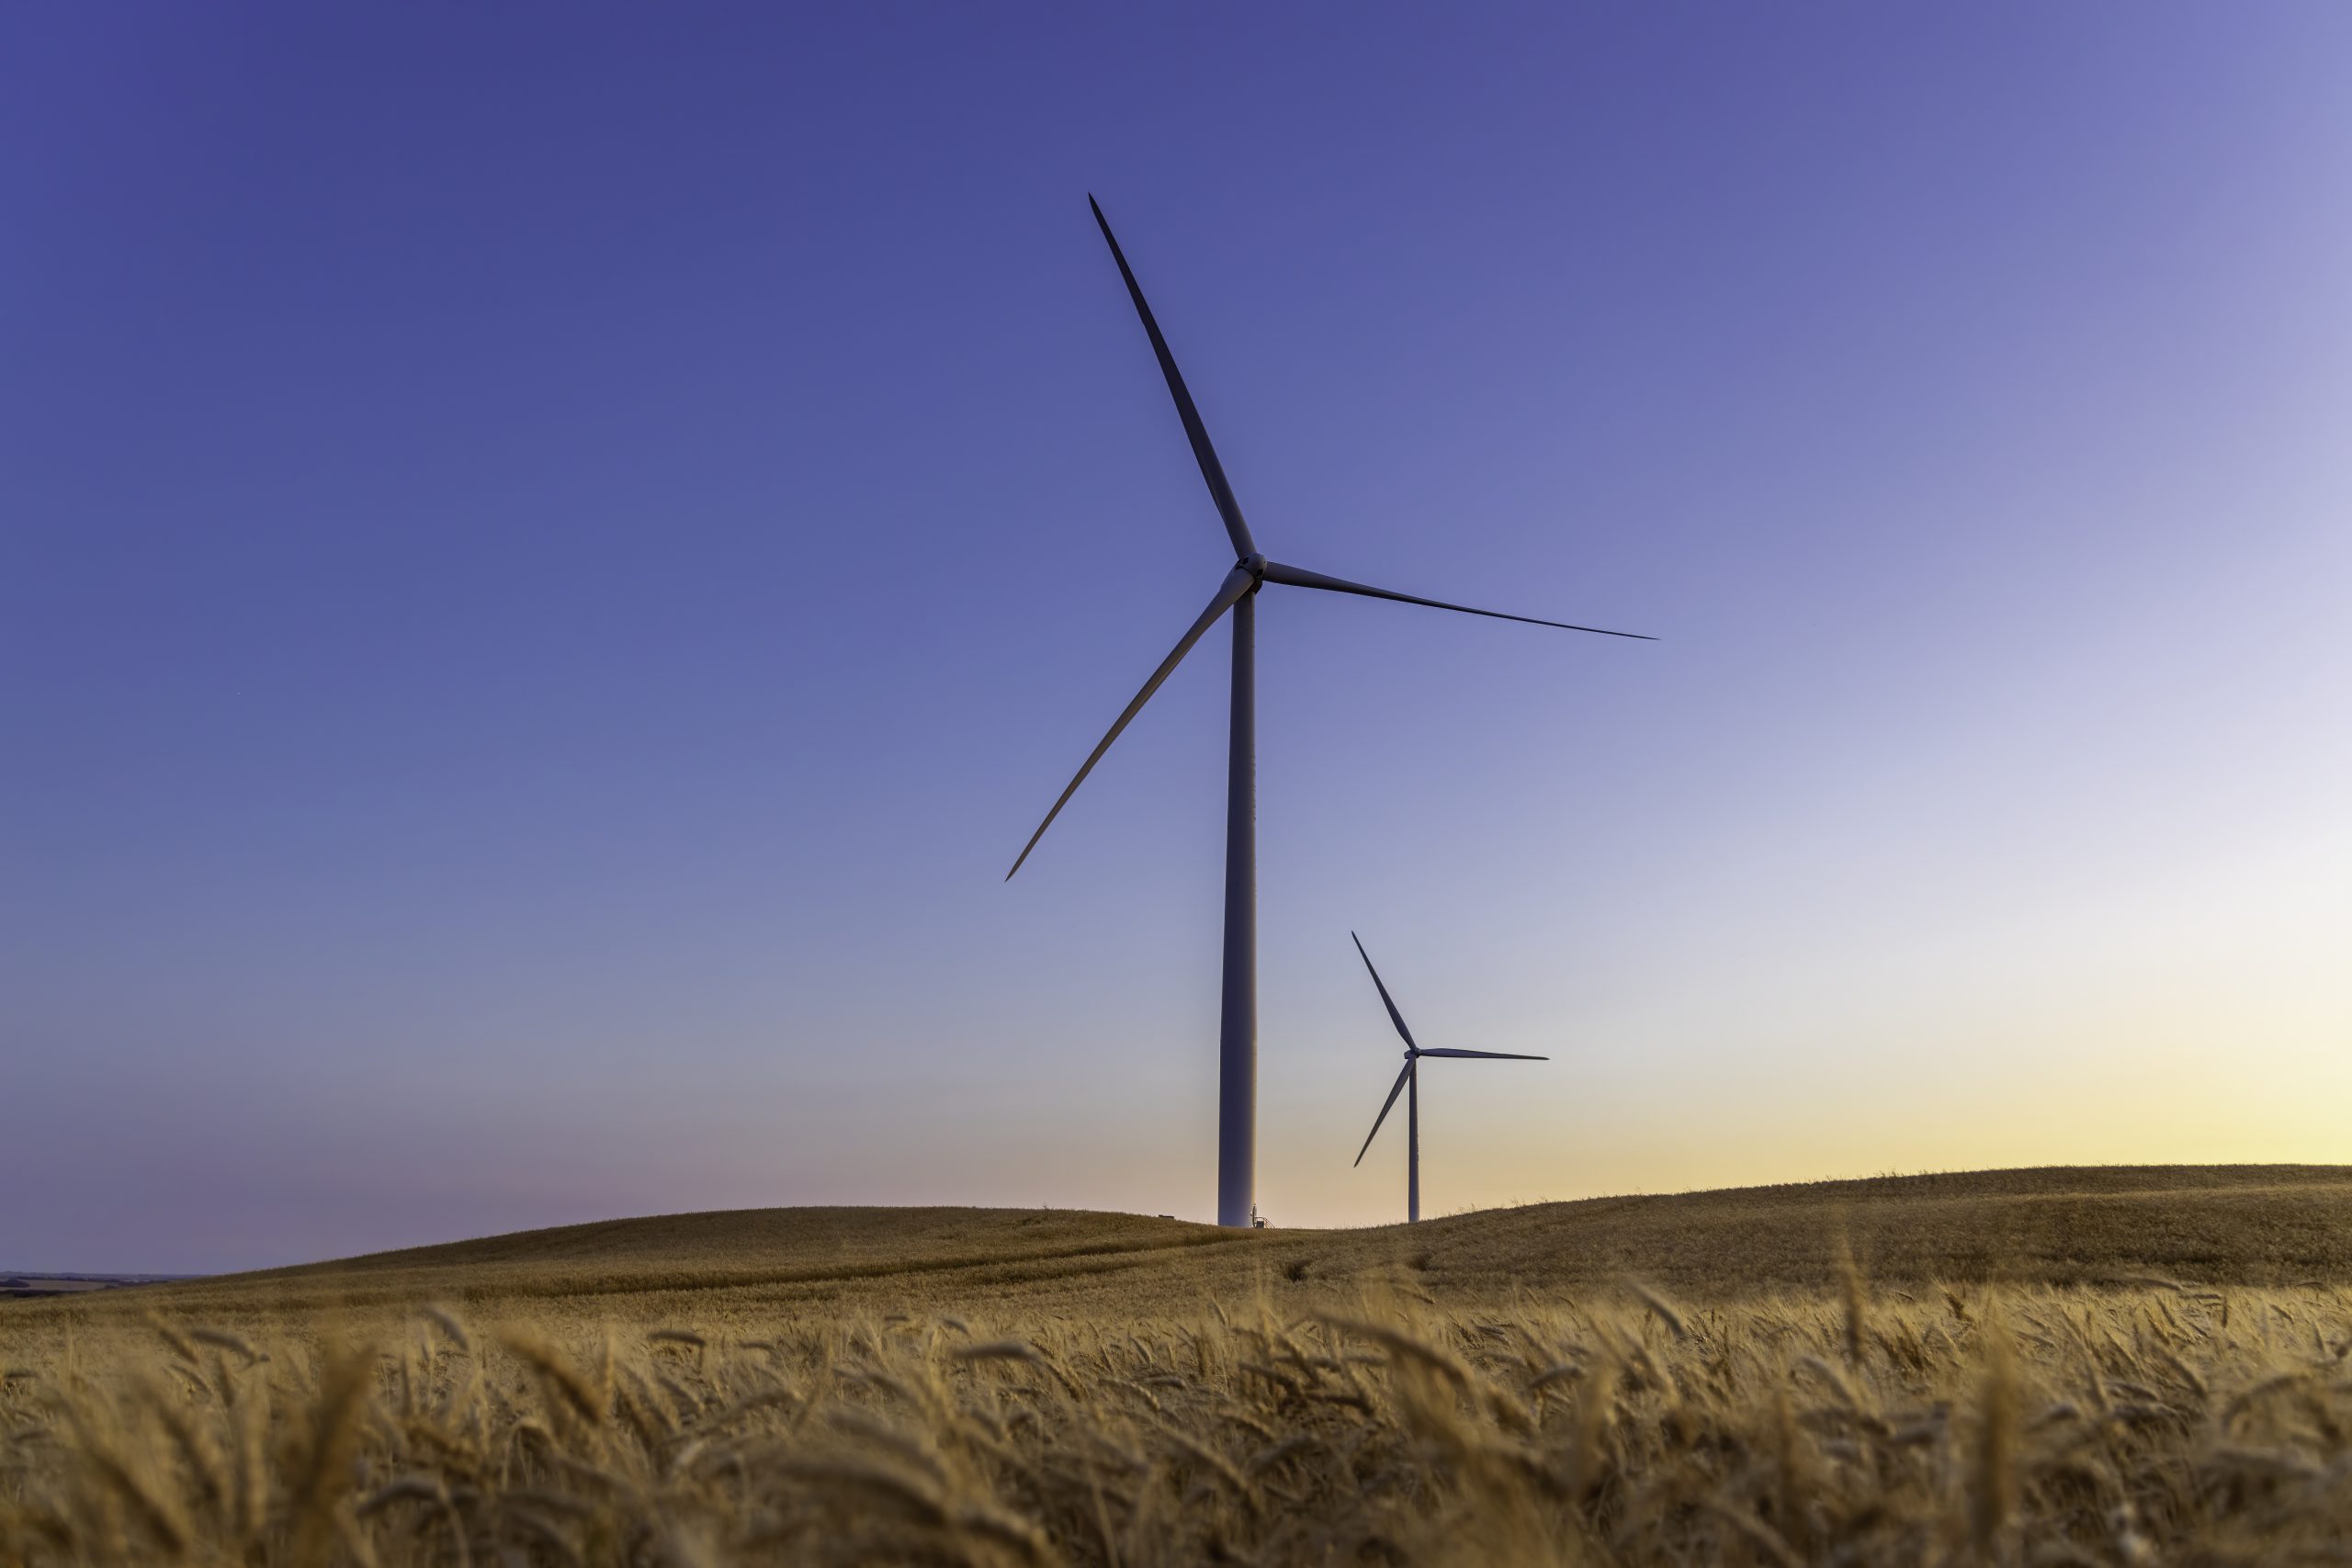 Two wind turbines rotate around generating energy in the middle of a wheat field.  Wind farms, are becoming an increasingly important source of intermittent renewable energy and are used by many countries as part of a strategy to reduce their reliance on fossil fuels.